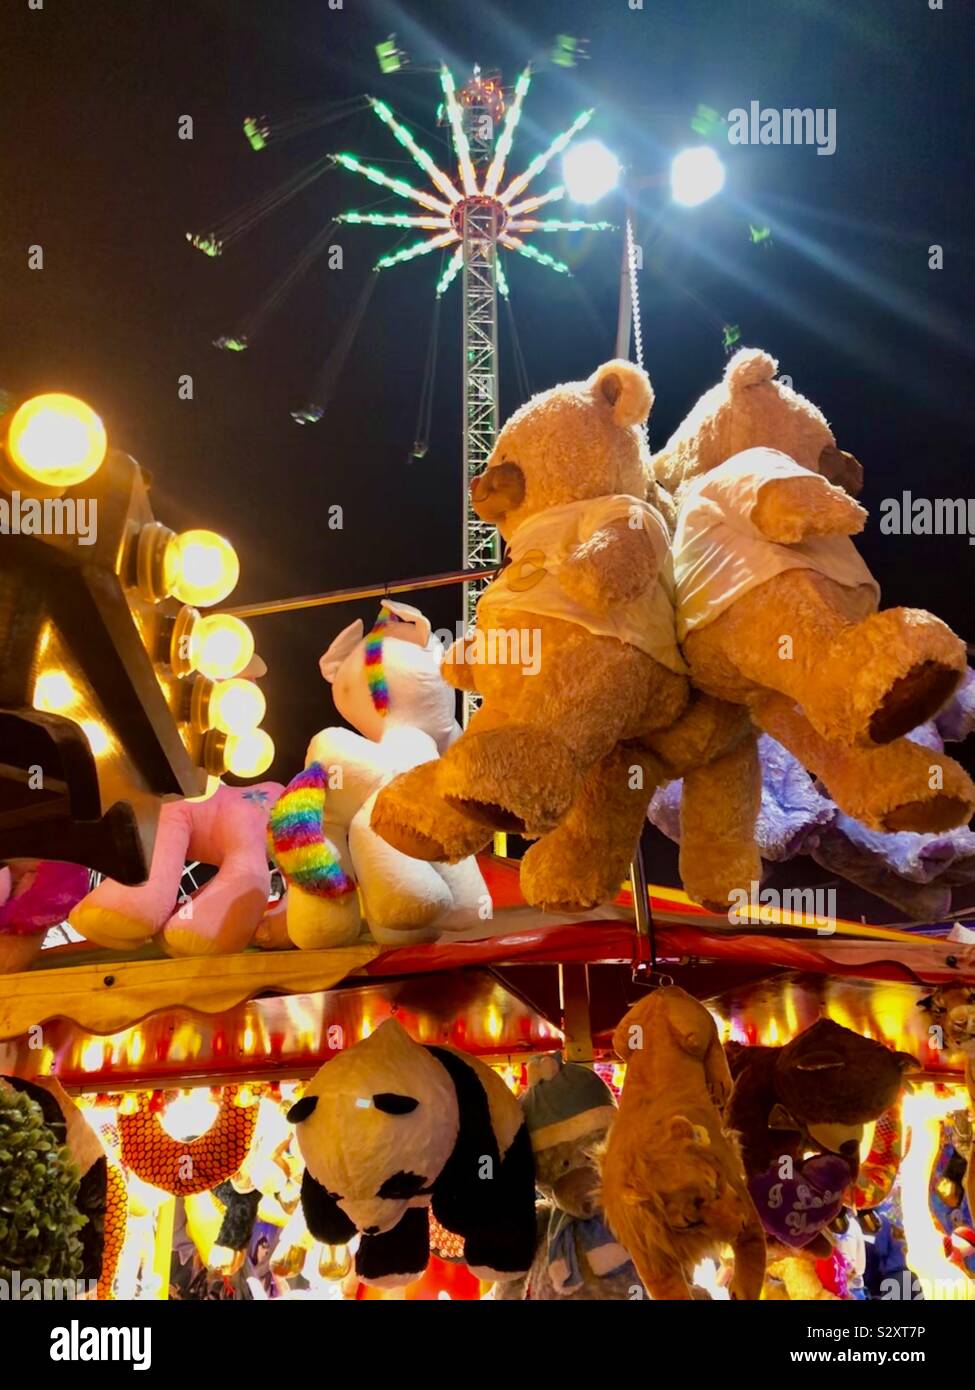 NOTTINGHAM, NOTTINGHAMSHIRE, UK - OCTOBER 4th 2019. Teddy bears and other prizes on a stall at the annual Goose Fair held on the Forest Recreation Ground. Stock Photo